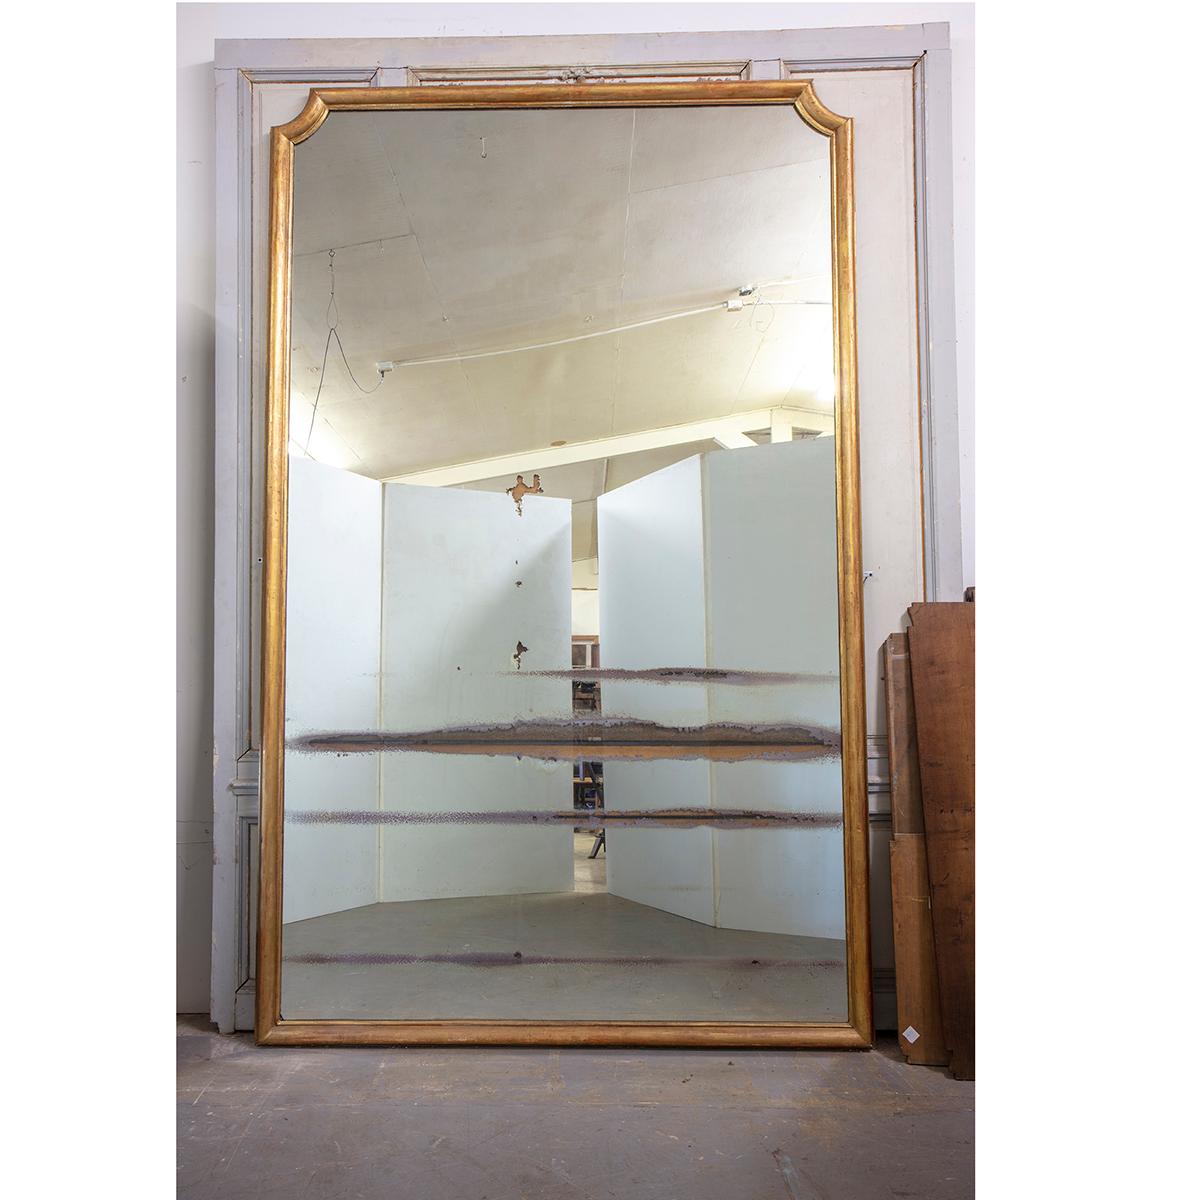 This is a massive French 19th century mirror from the main hall of the Archbishop Palace Rouen, Normandy, France. This mirror is over 10’ tall and more than 6’ wide. Both the frame and mirror show aging. The original mercury mirror plate has